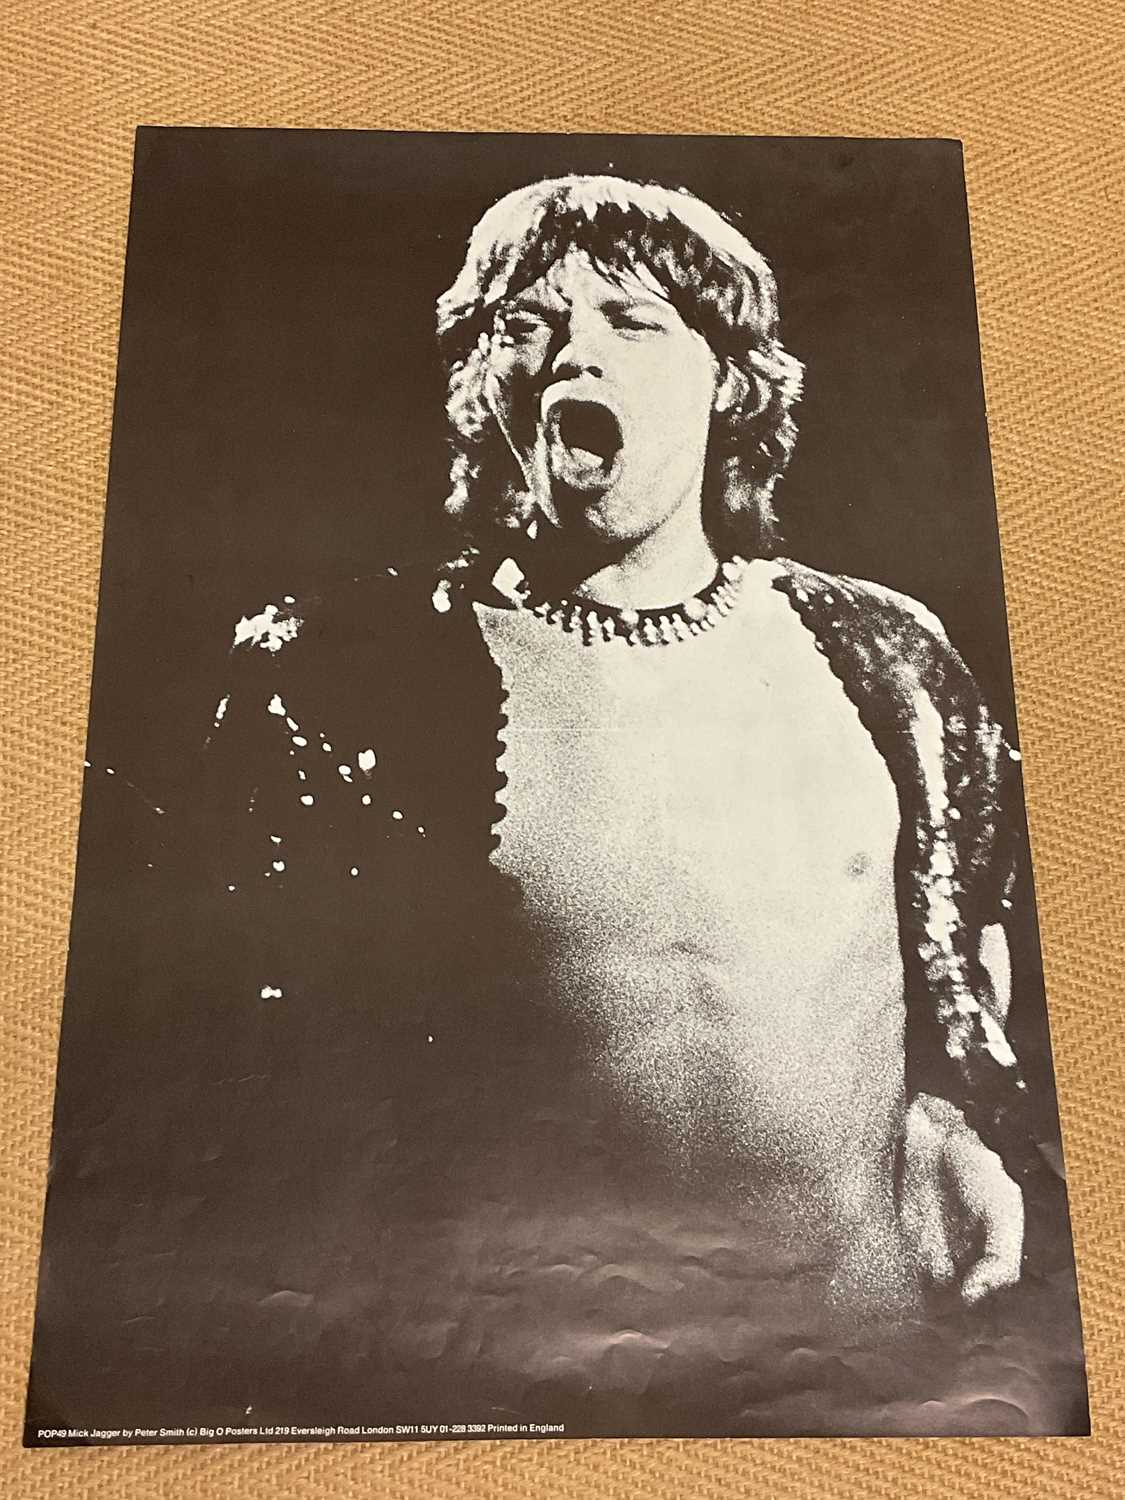 MICK JAGGER; three original black and white posters of The Rolling Stones singer, published by Big O - Image 2 of 6